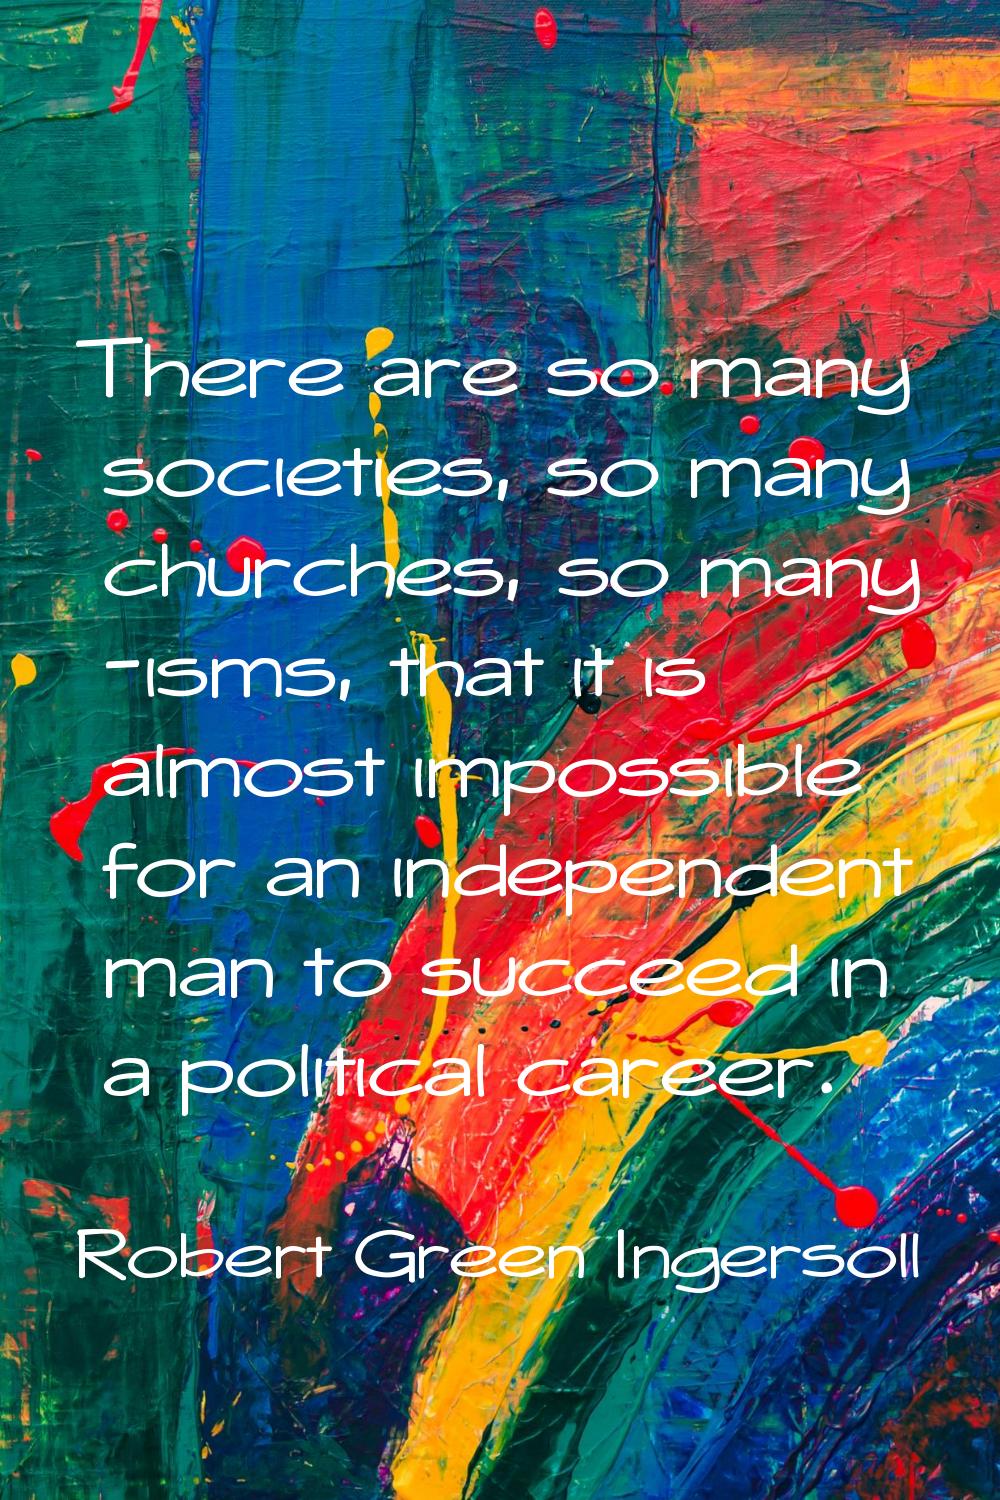 There are so many societies, so many churches, so many -isms, that it is almost impossible for an i